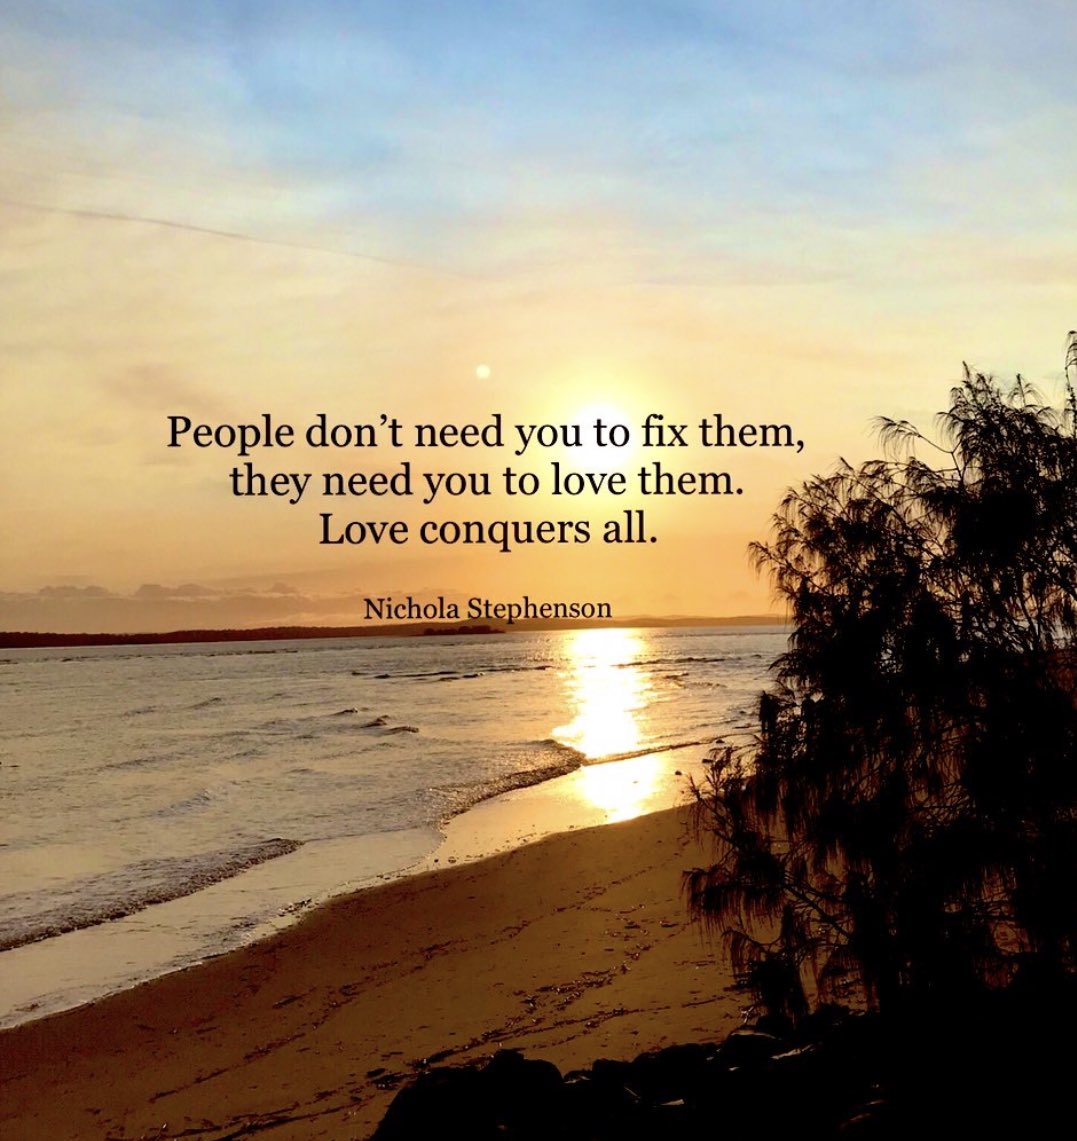 People don’t need you to fix them, they need you to love them. Love conquers all - NLS 🫶🏻

#positive #mentalhealth #mindset #love #JoyTrain #successtrain #thinkbigsundaywithmarsha #thrivetogether